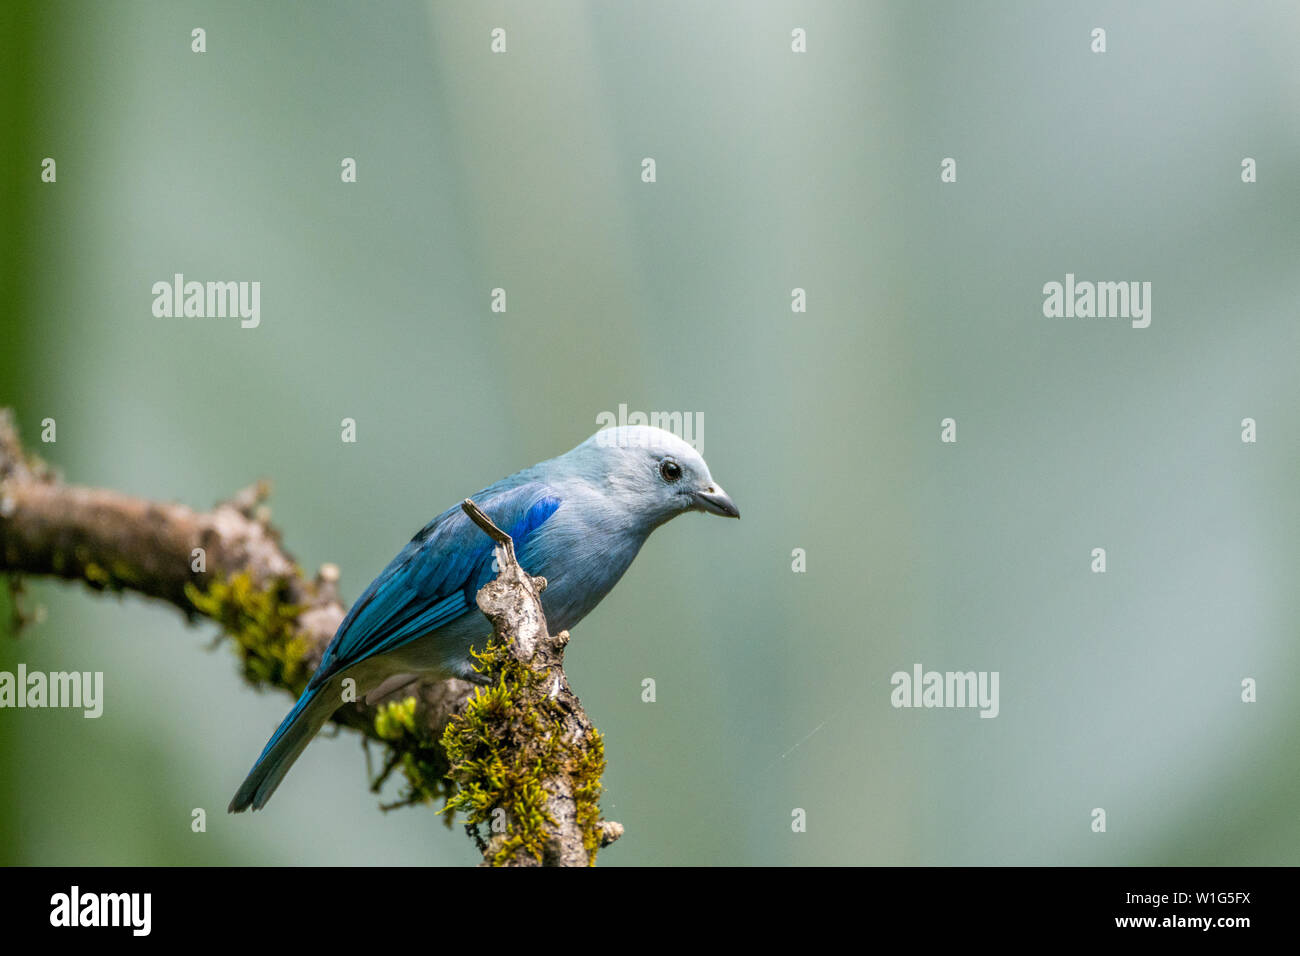 Blue-gray tanager (Thraupis episcopus) perches on a branch in Maquenque, Costa Rica Stock Photo